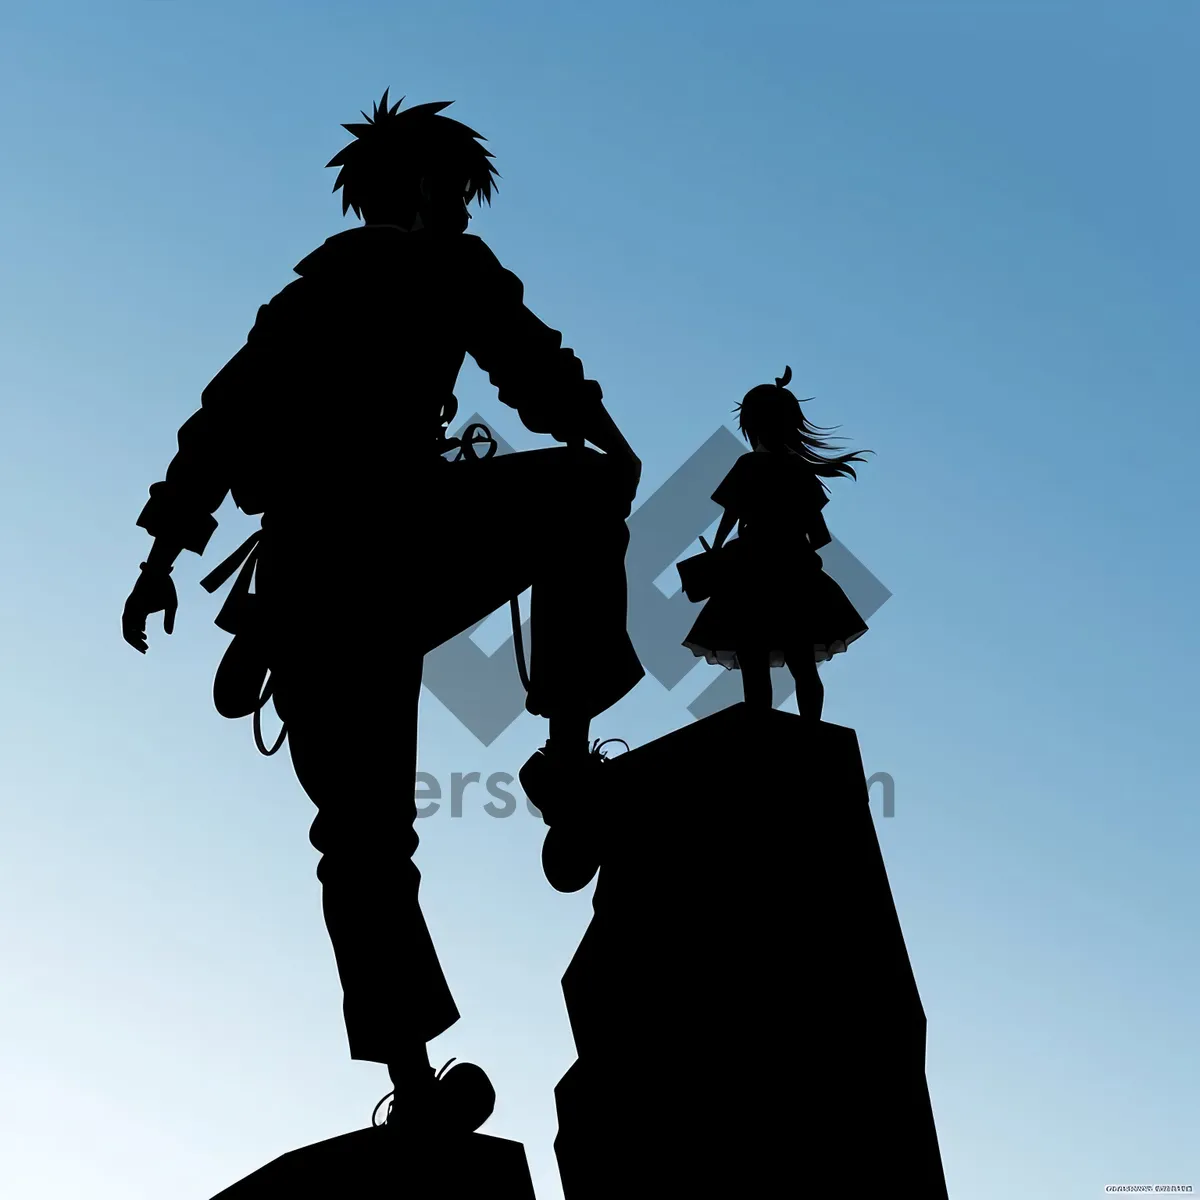 Picture of Black Silhouette Art: Men in Statue Competition